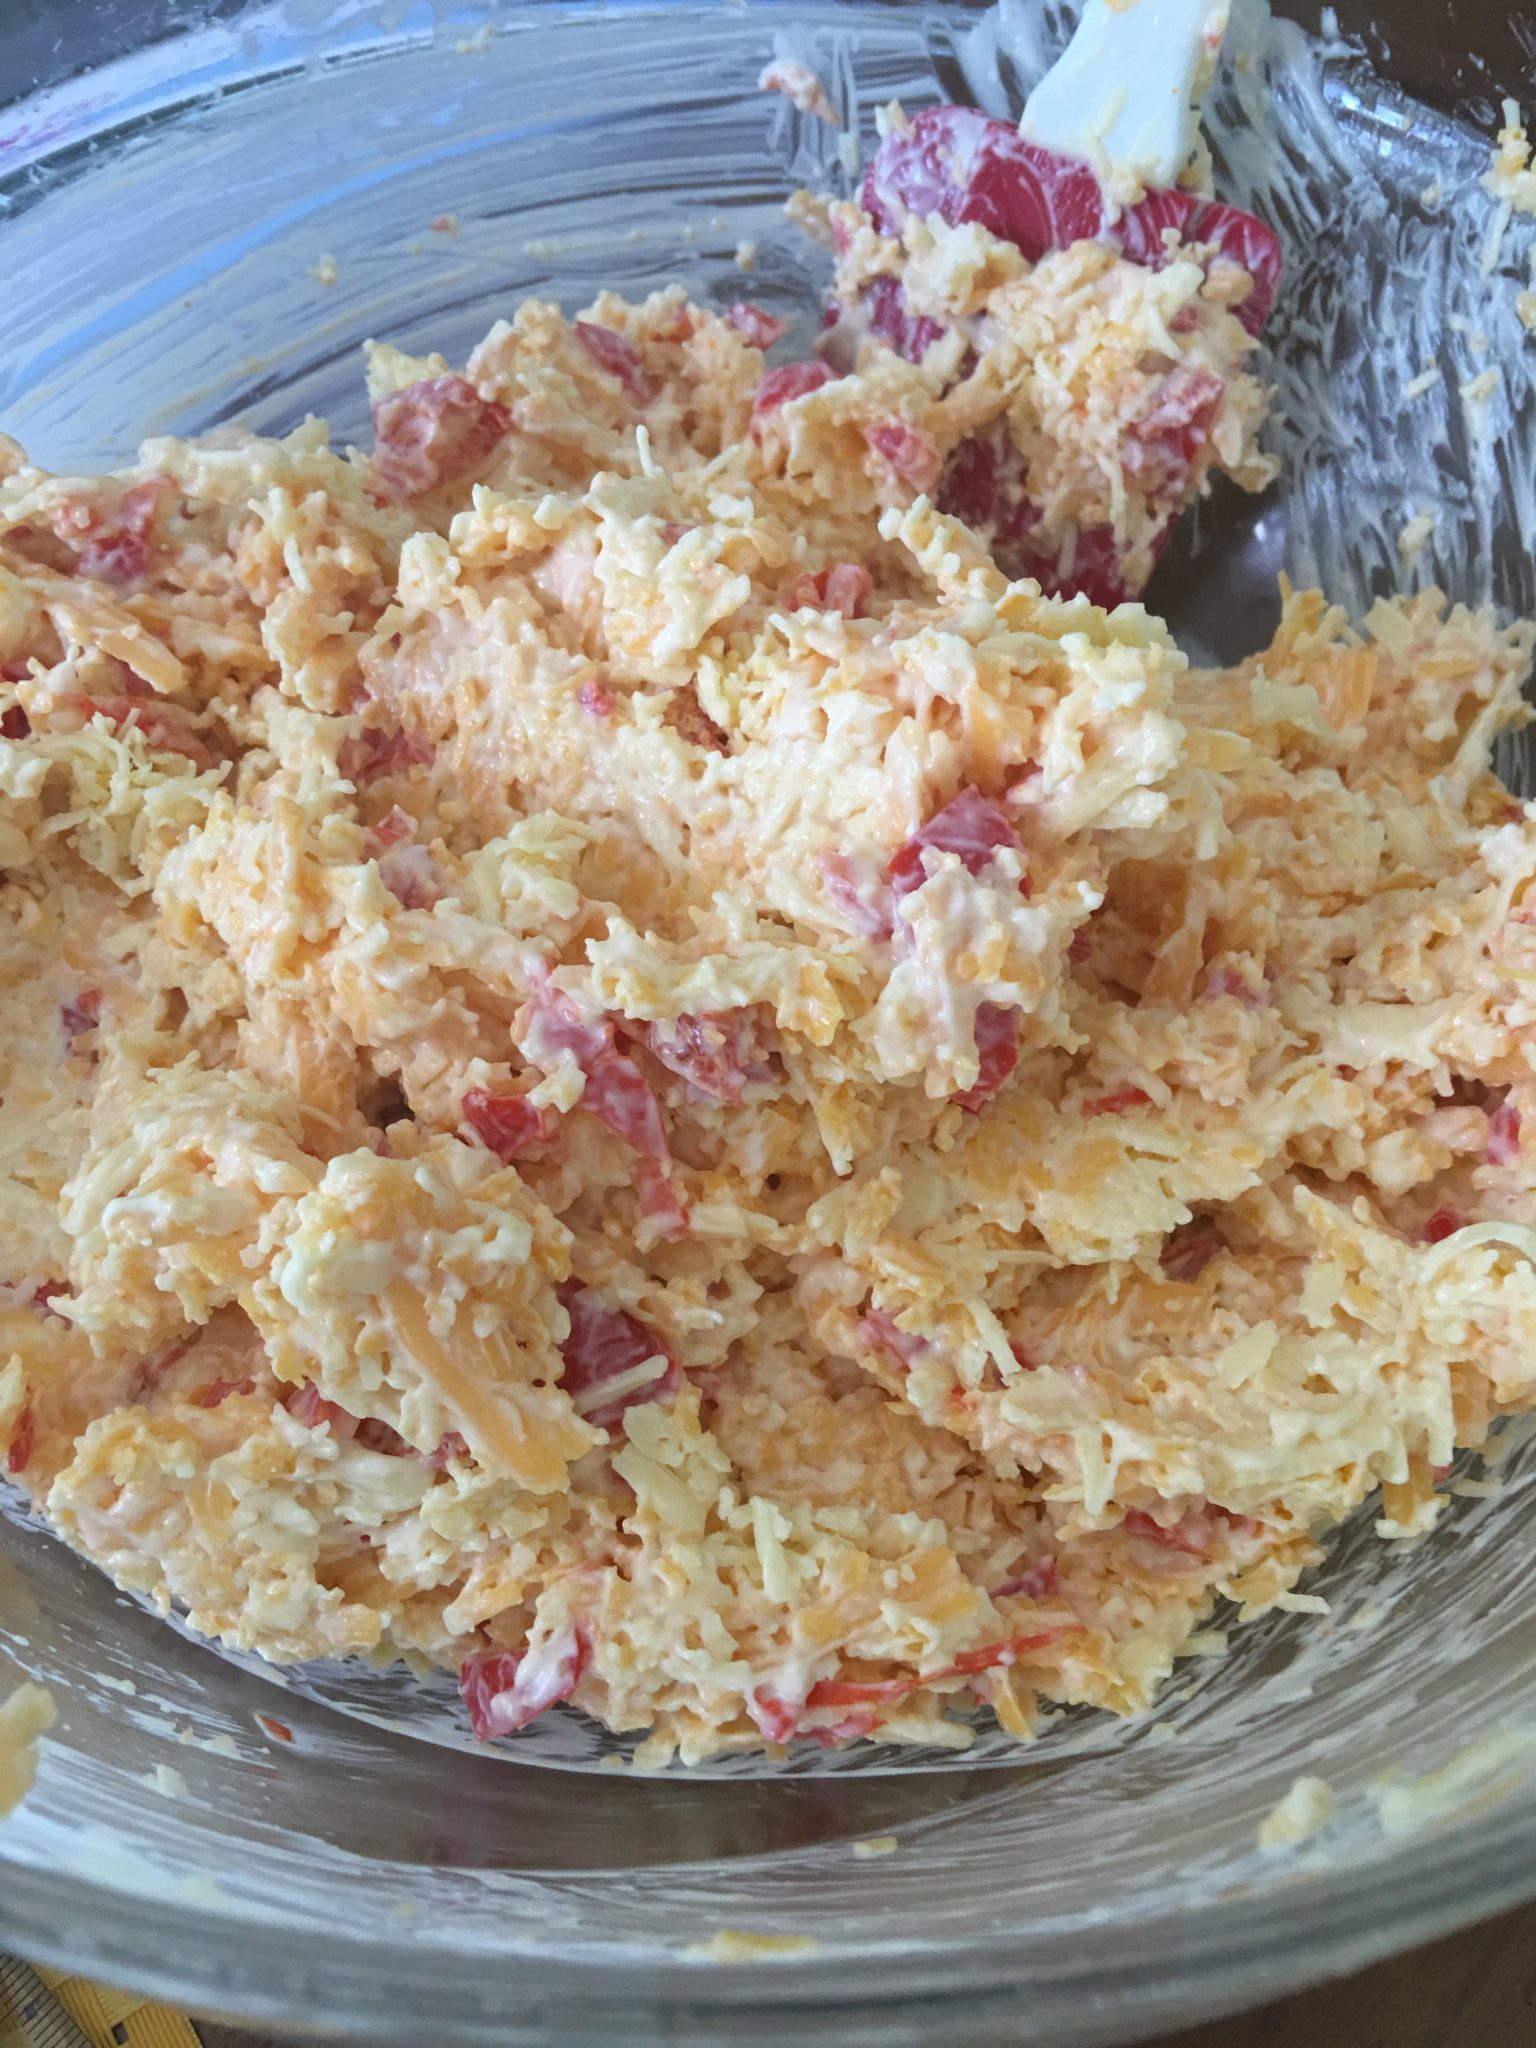 Homemade Pimento Cheese in a Bowl